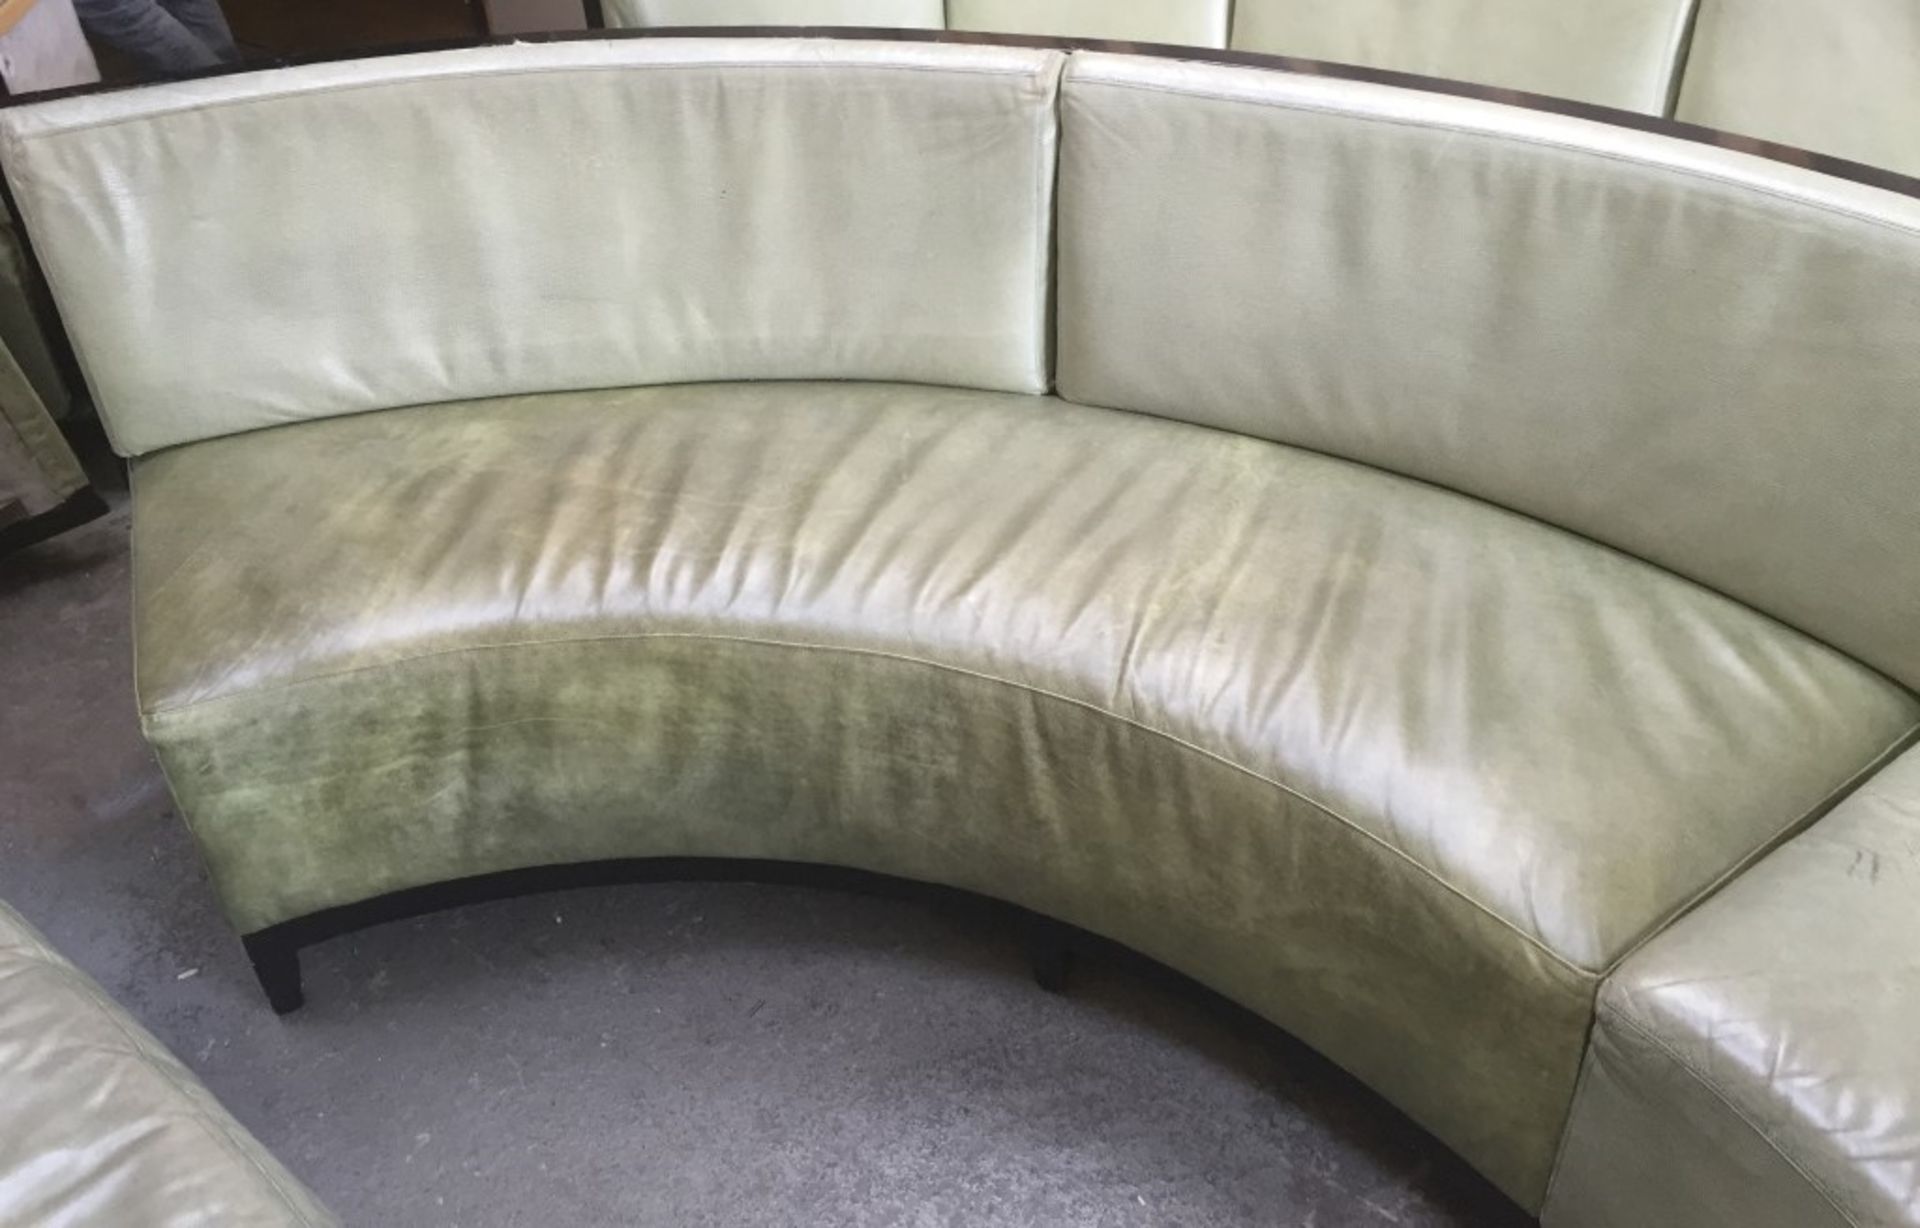 1 x Luxury Upholstered Curved Seating Area - Recently Removed From Nobu - Dimensions: W285 x D62cm x - Image 3 of 23